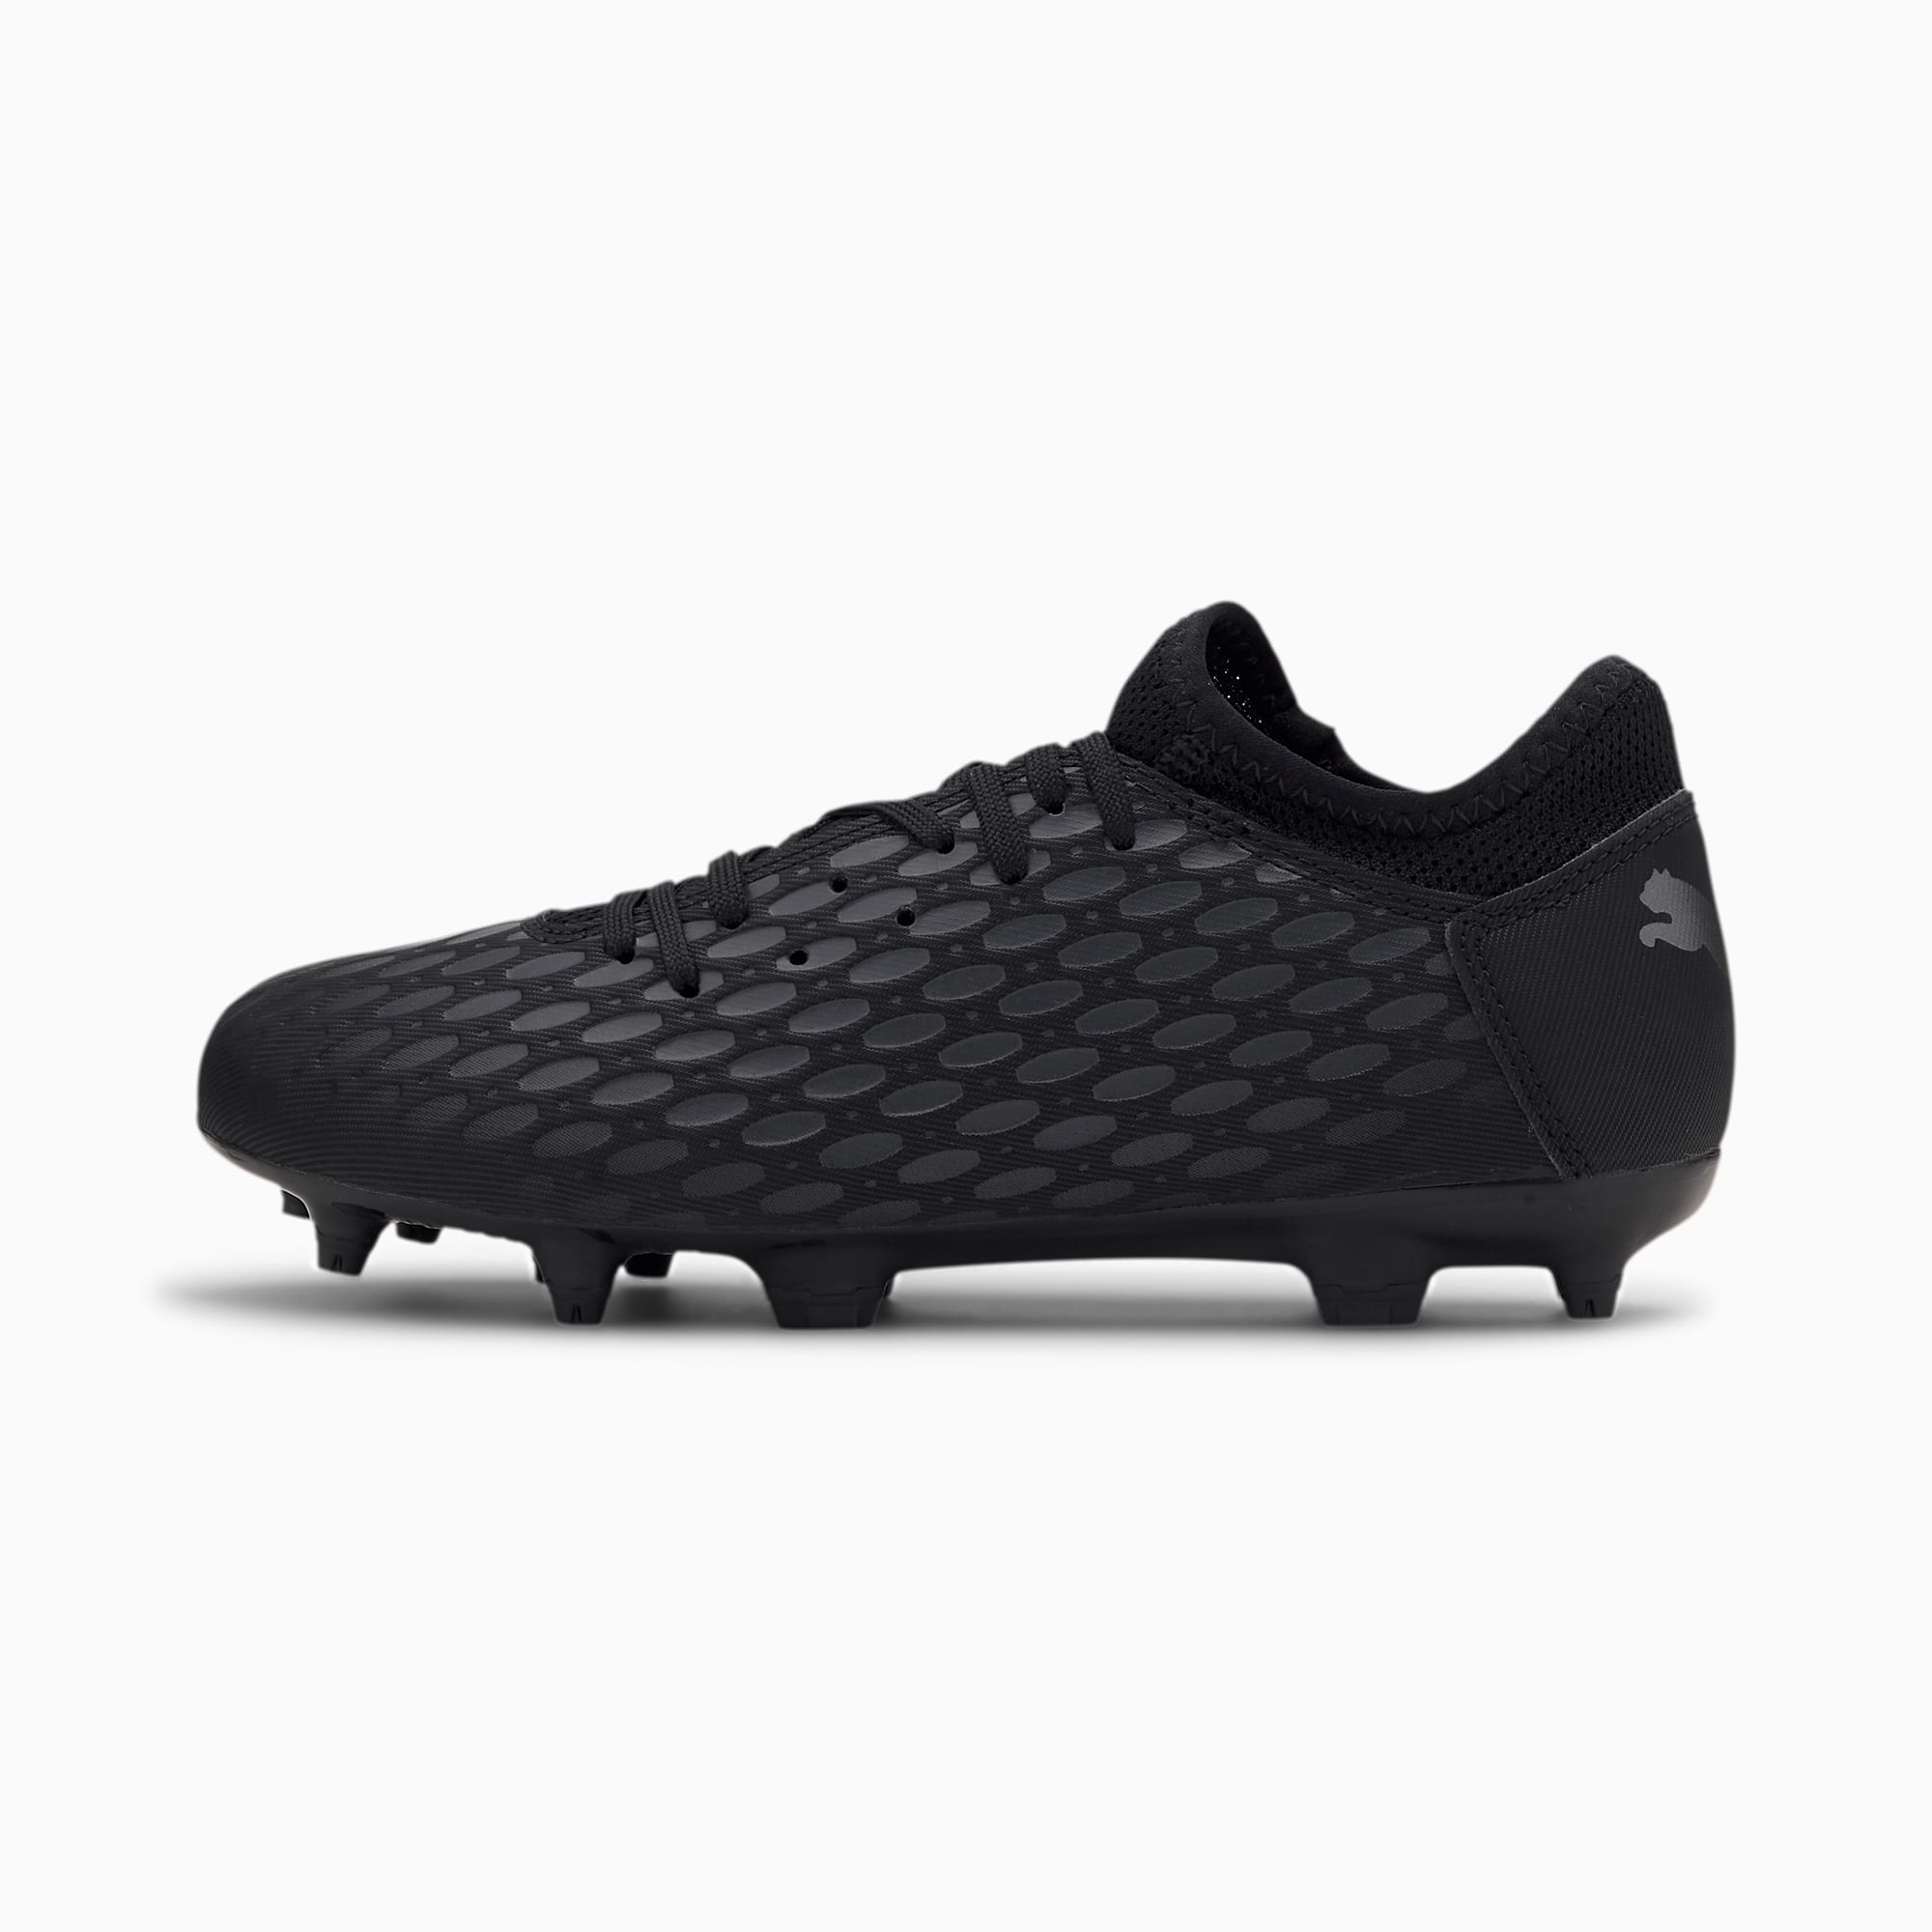 FUTURE 5.4 FG/AG Youth Football Boots 